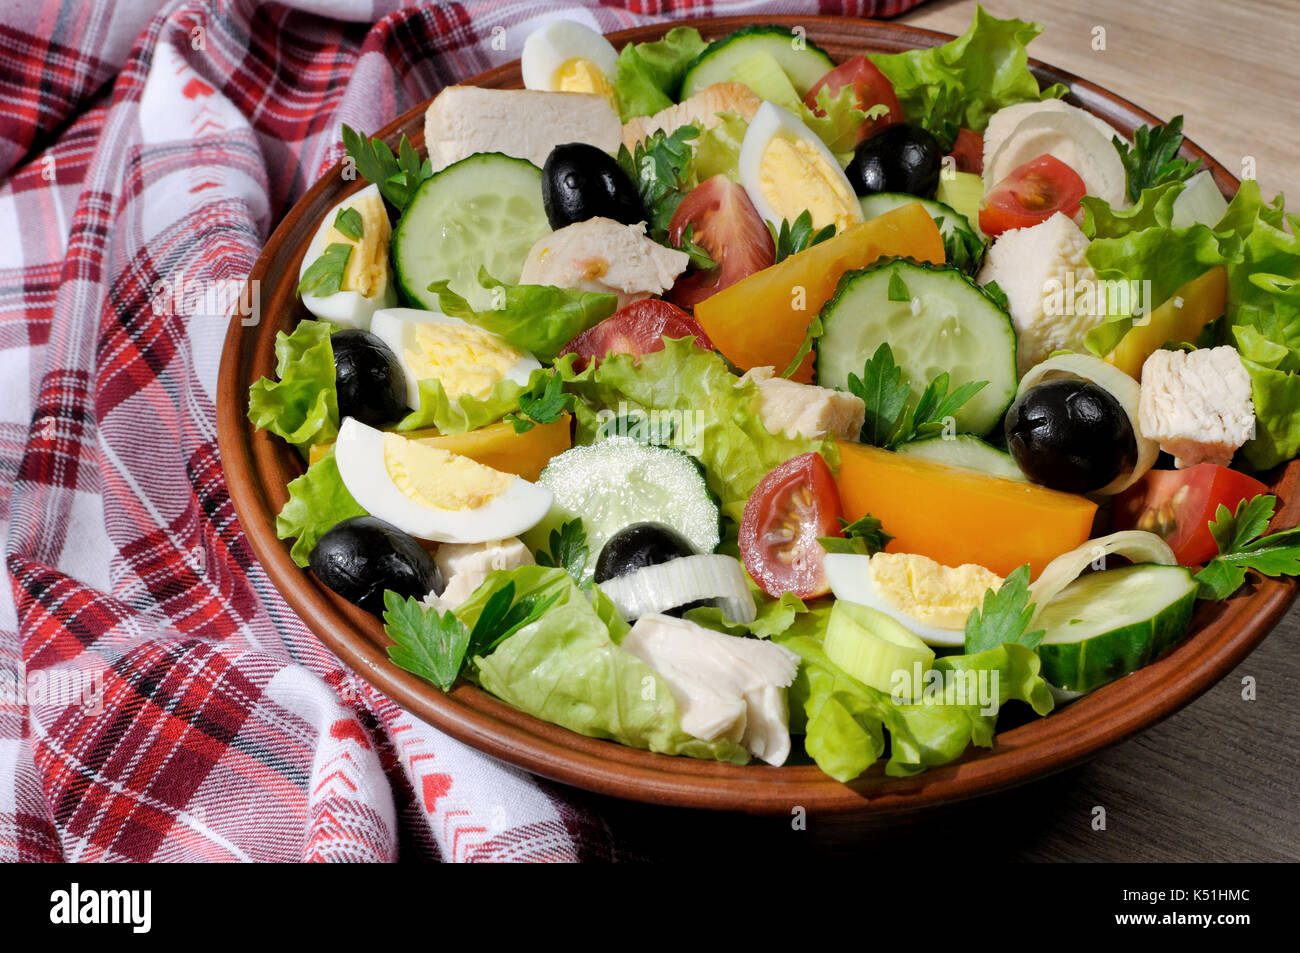 Vegetable salad with chicken and eggs, olives in lettuce leaves. Horizontal shot. Close-up. Stock Photo